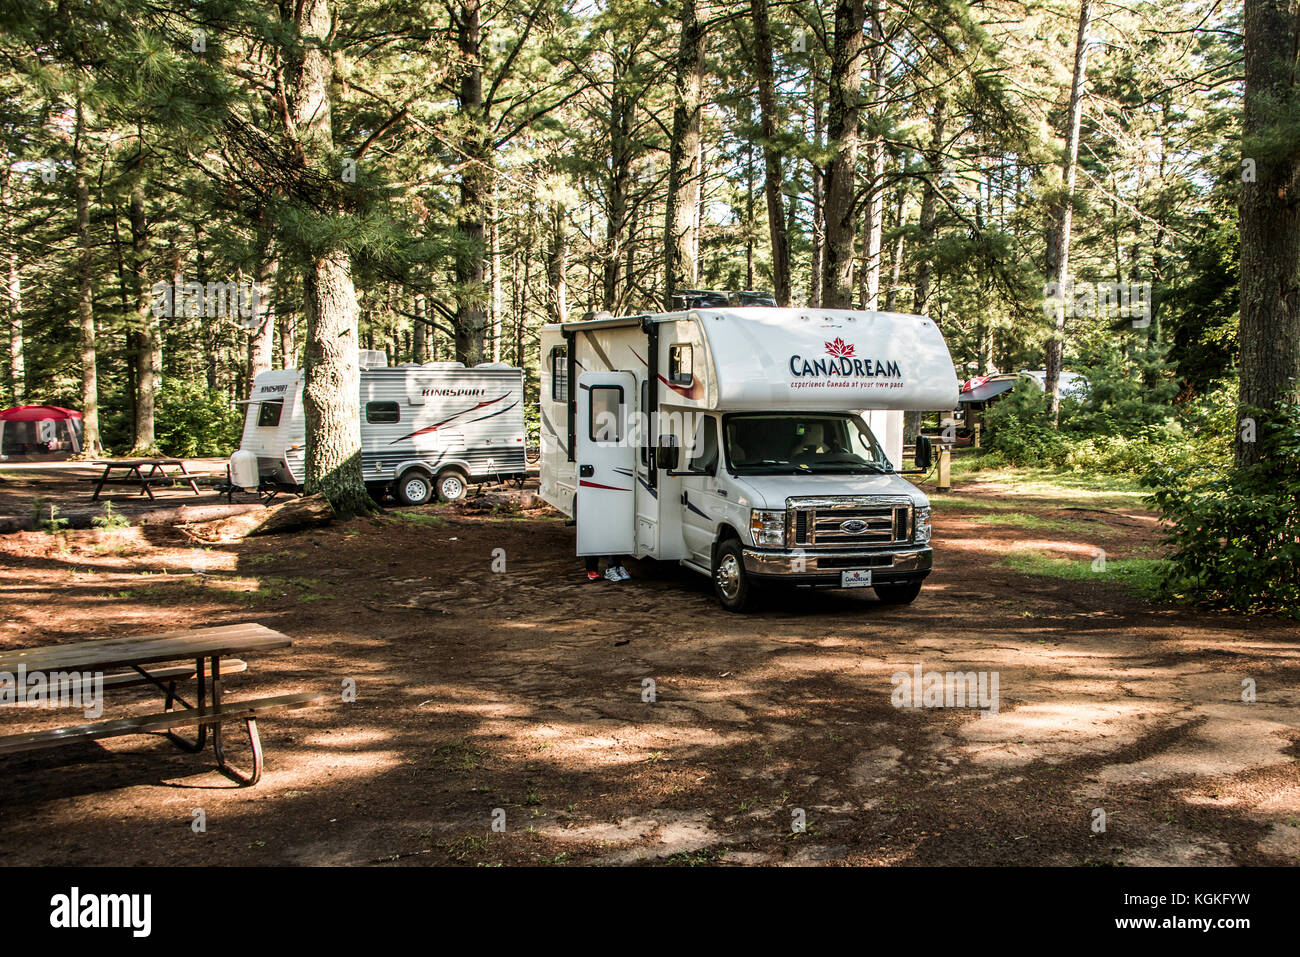 Canada Ontario Algonquin National Park 30.09.2017 - Parked RV camper car at Lake of two rivers Campground Beautiful natural forest Canadream Stock Photo